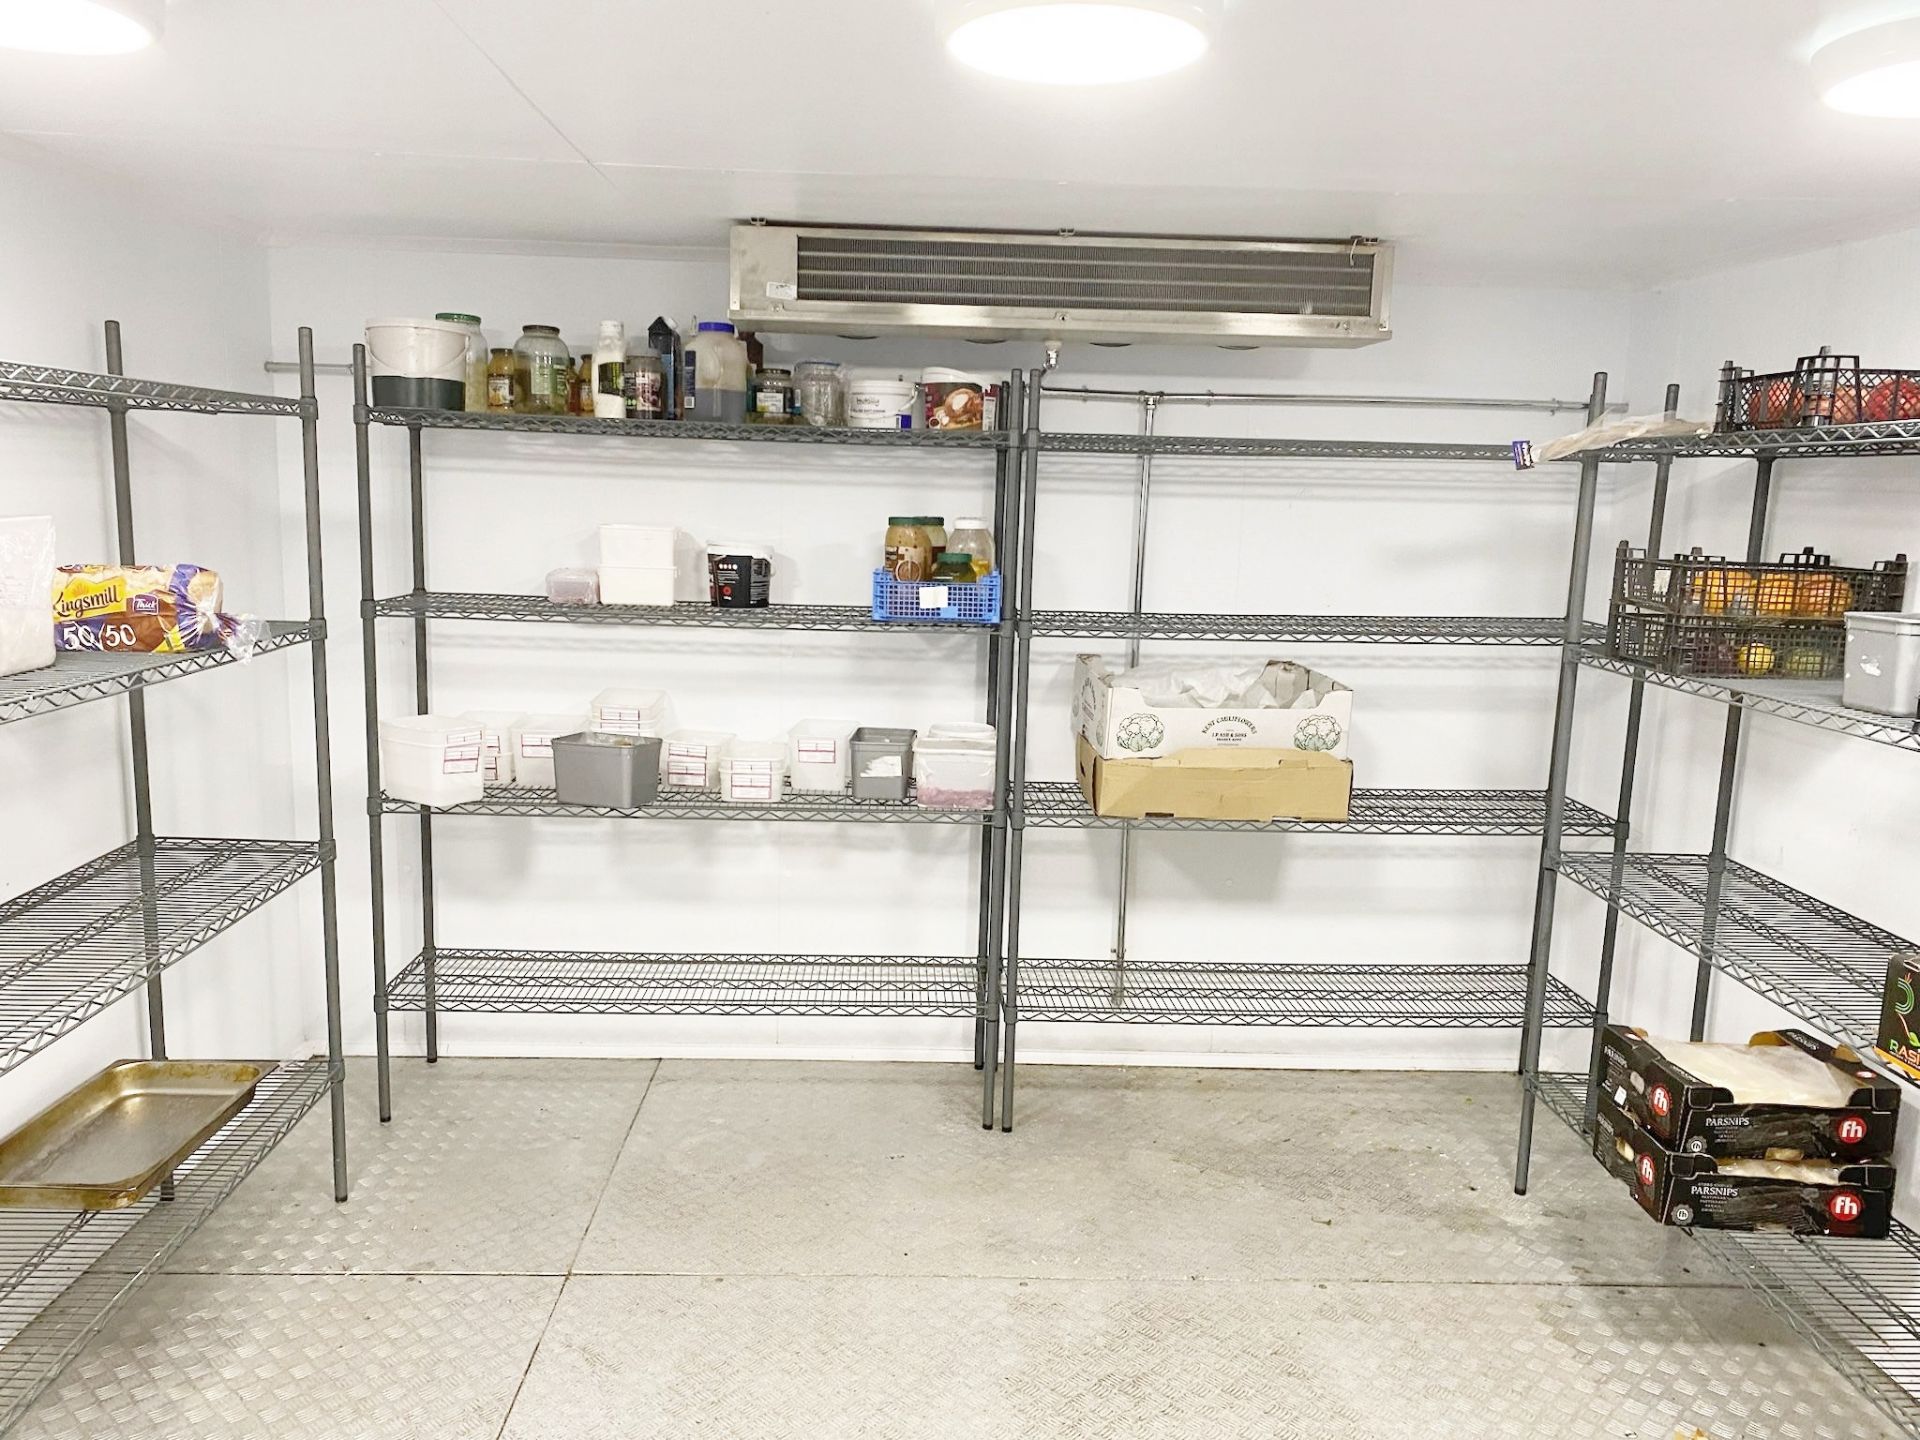 1 x Walk in Refrigeration System Including 2 x Cold Rooms and 1 x Freezer Room - Image 4 of 13